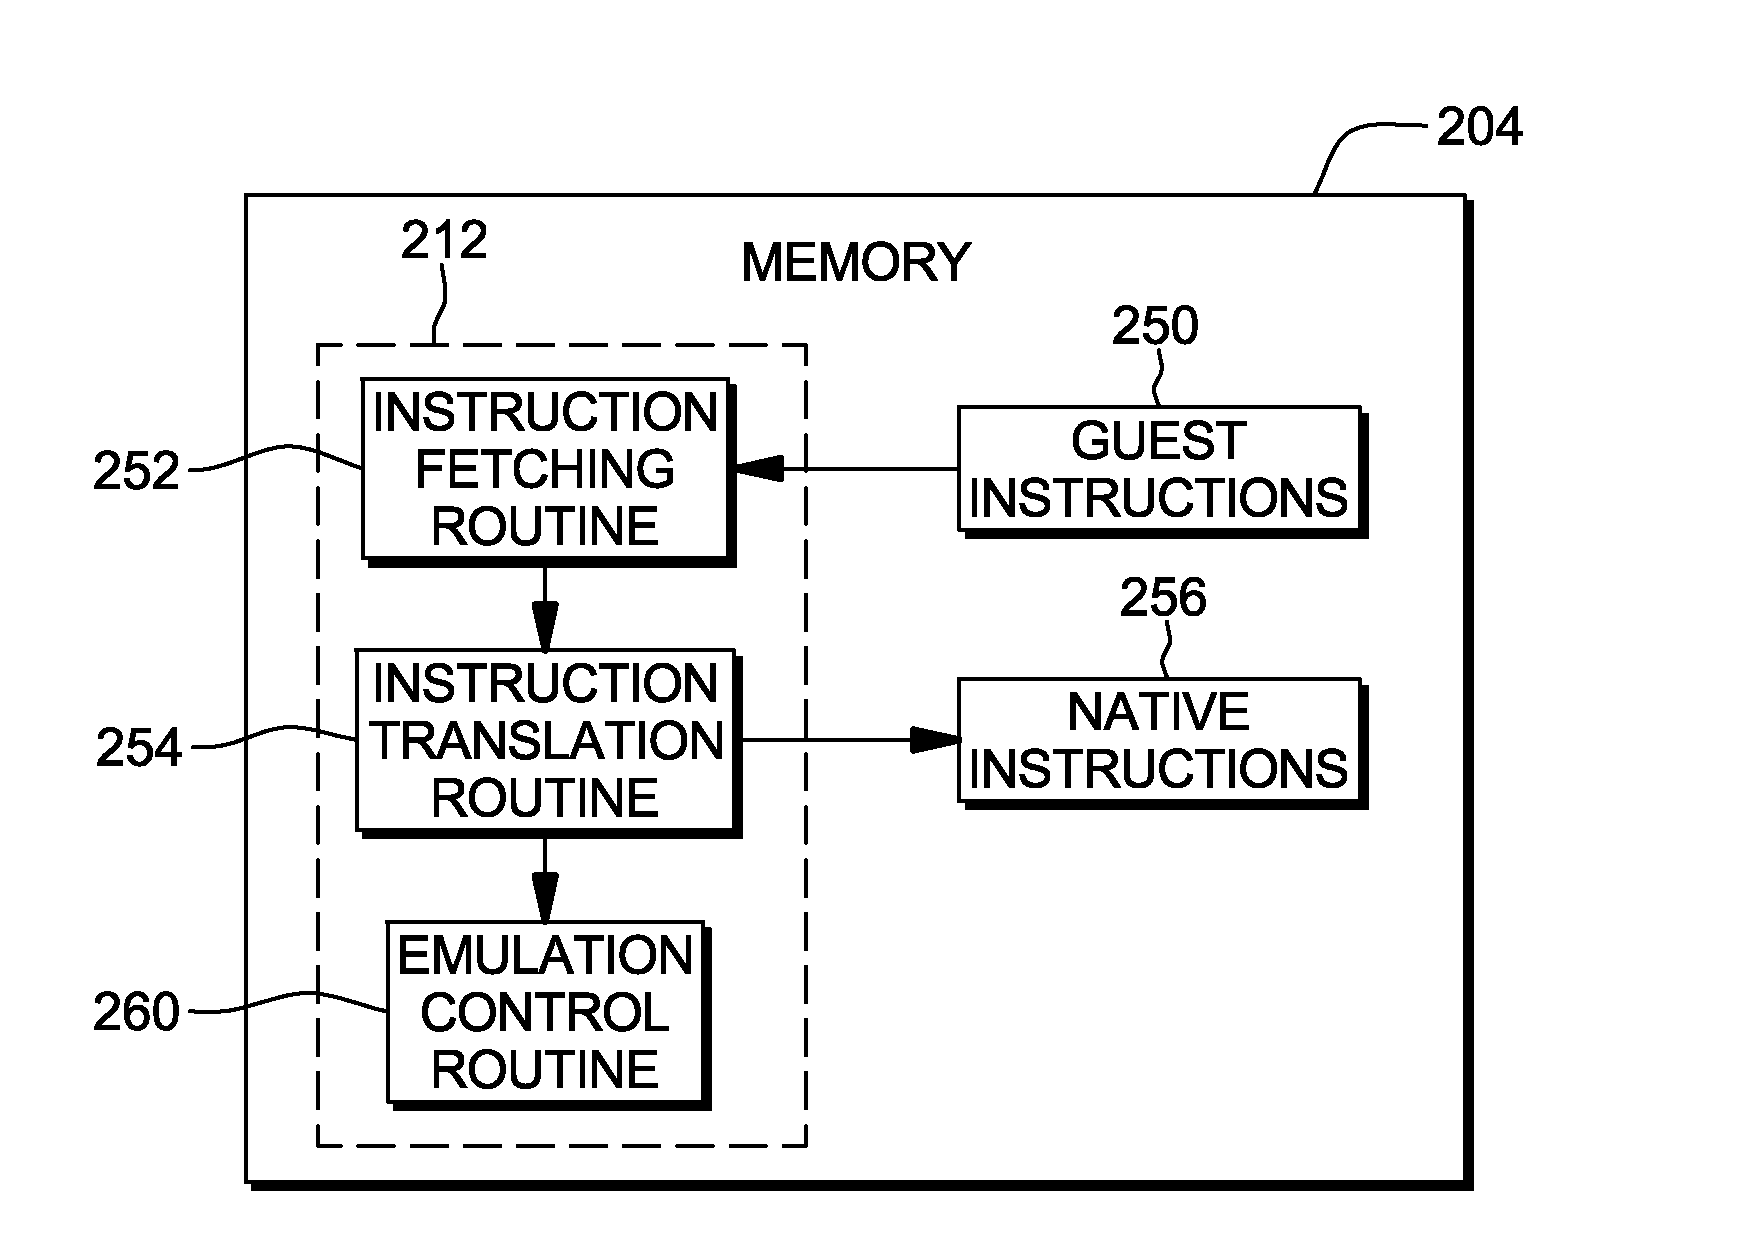 Instruction to load data up to a dynamically determined memory boundary